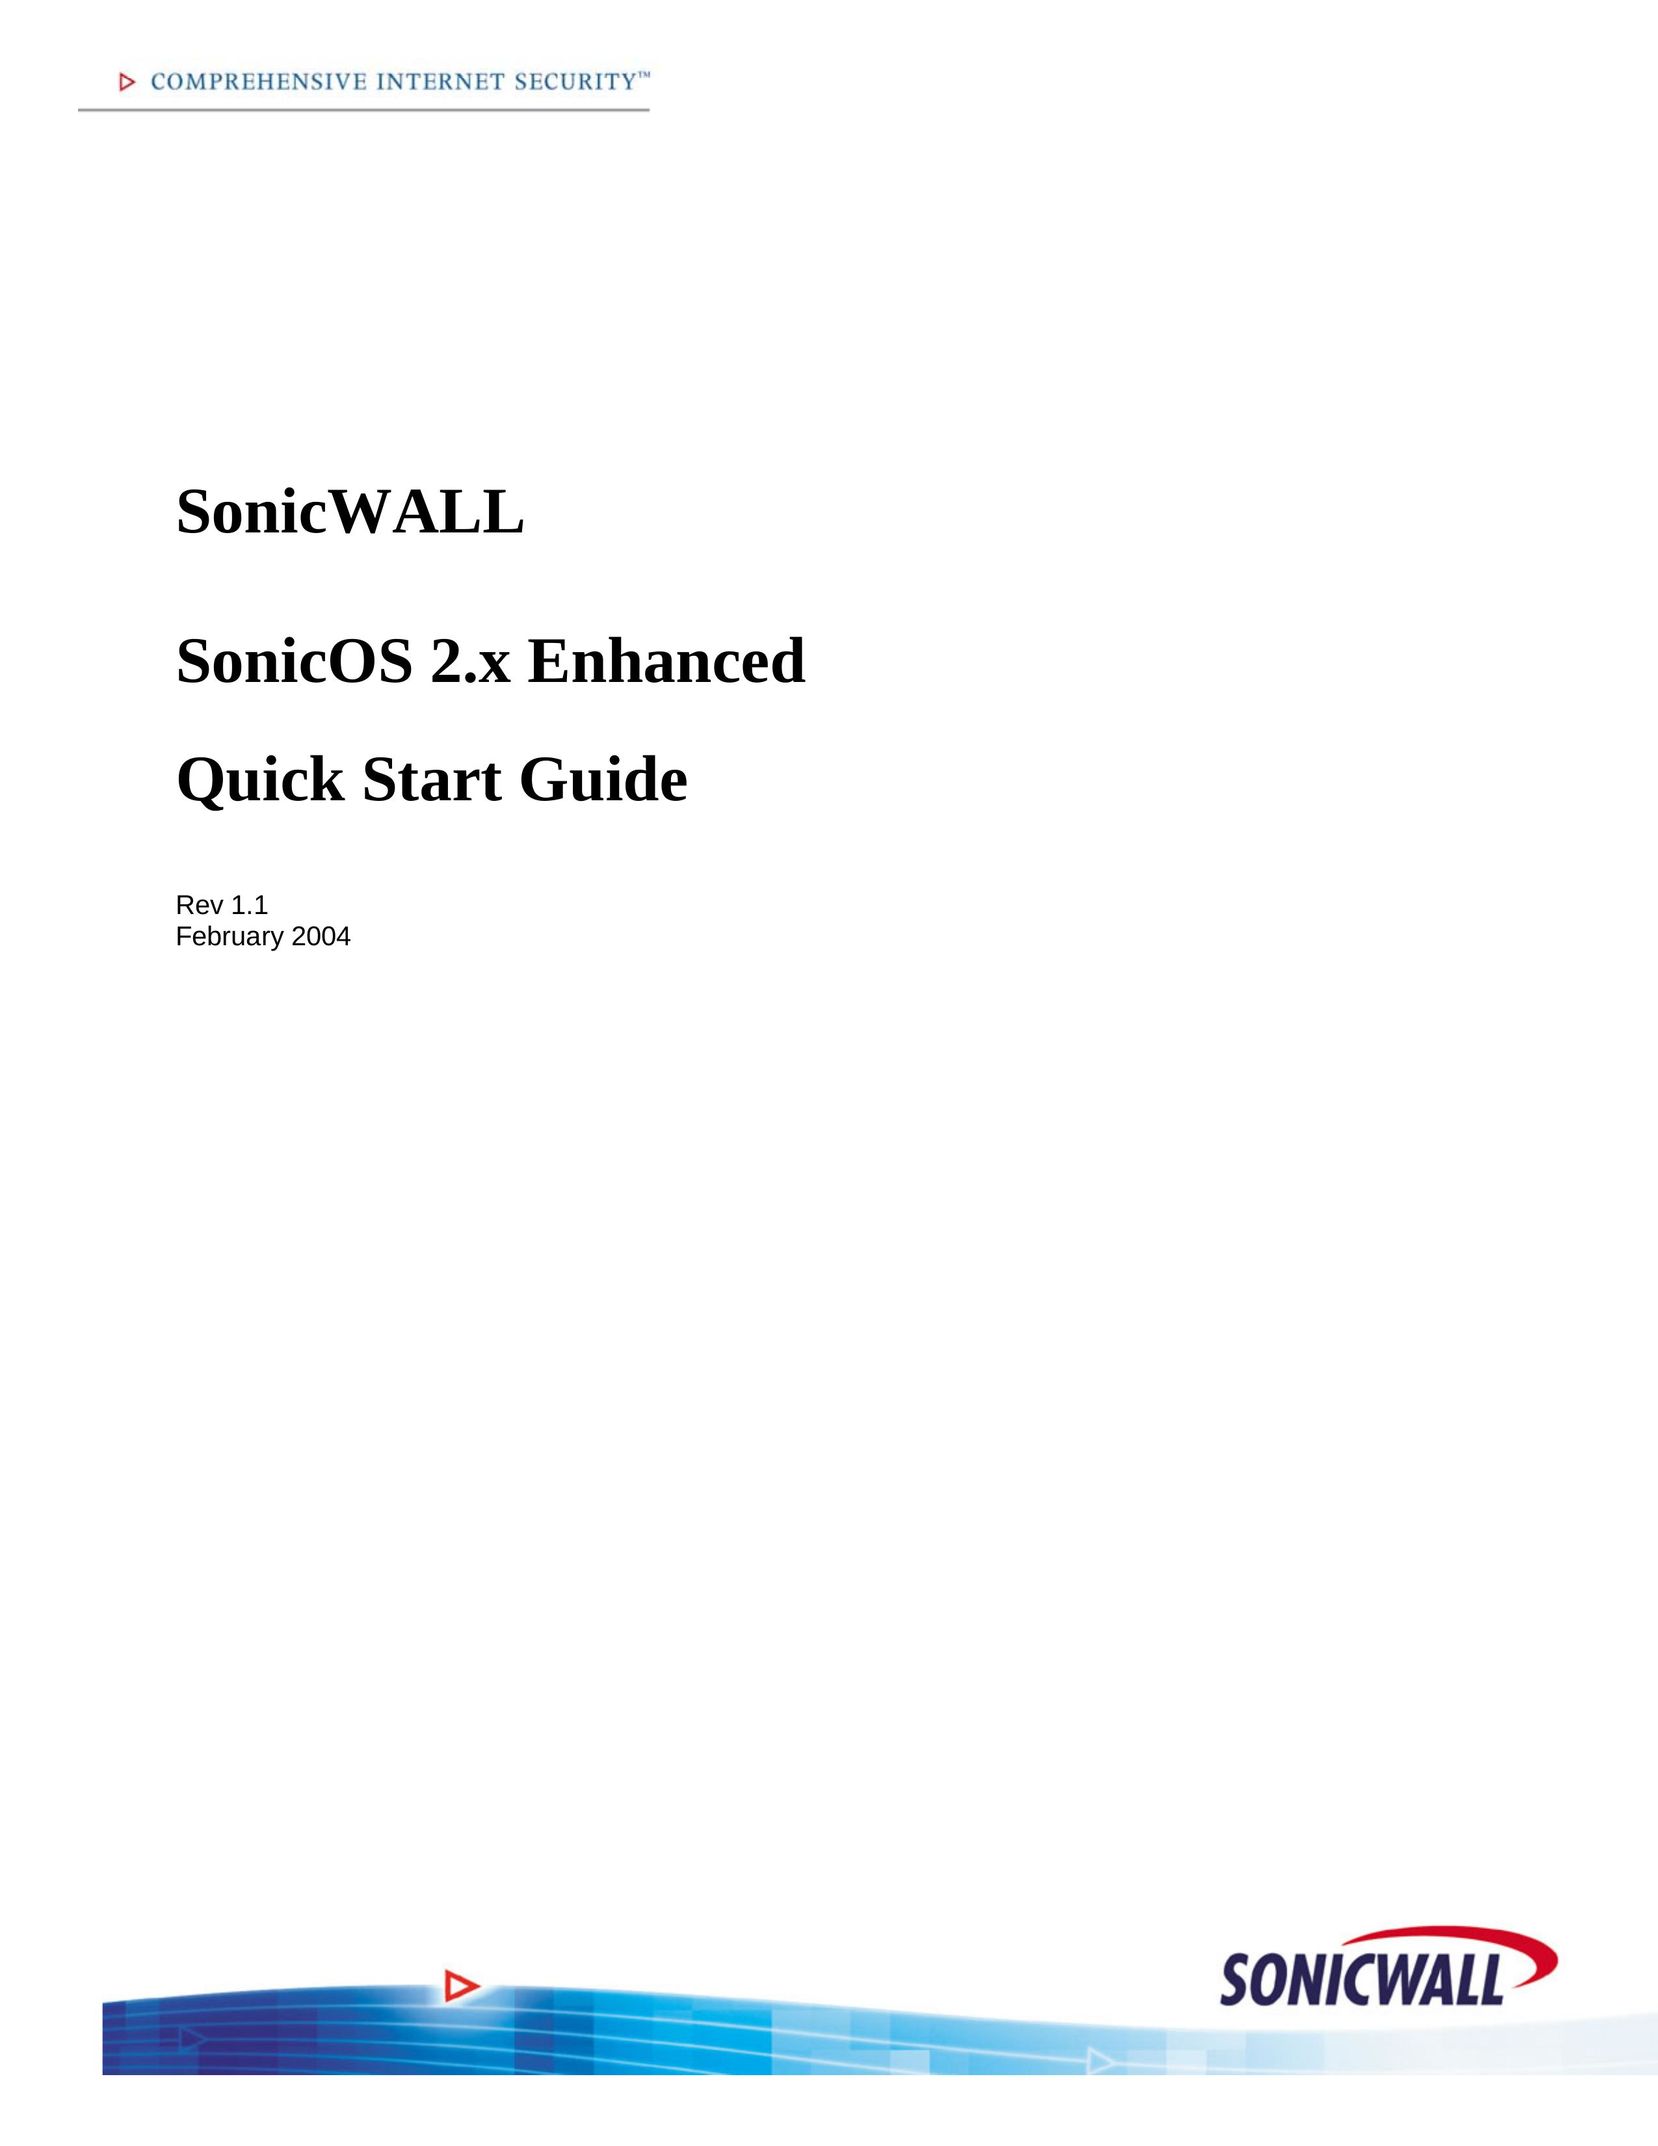 SonicWALL OS 2.x Network Card User Manual